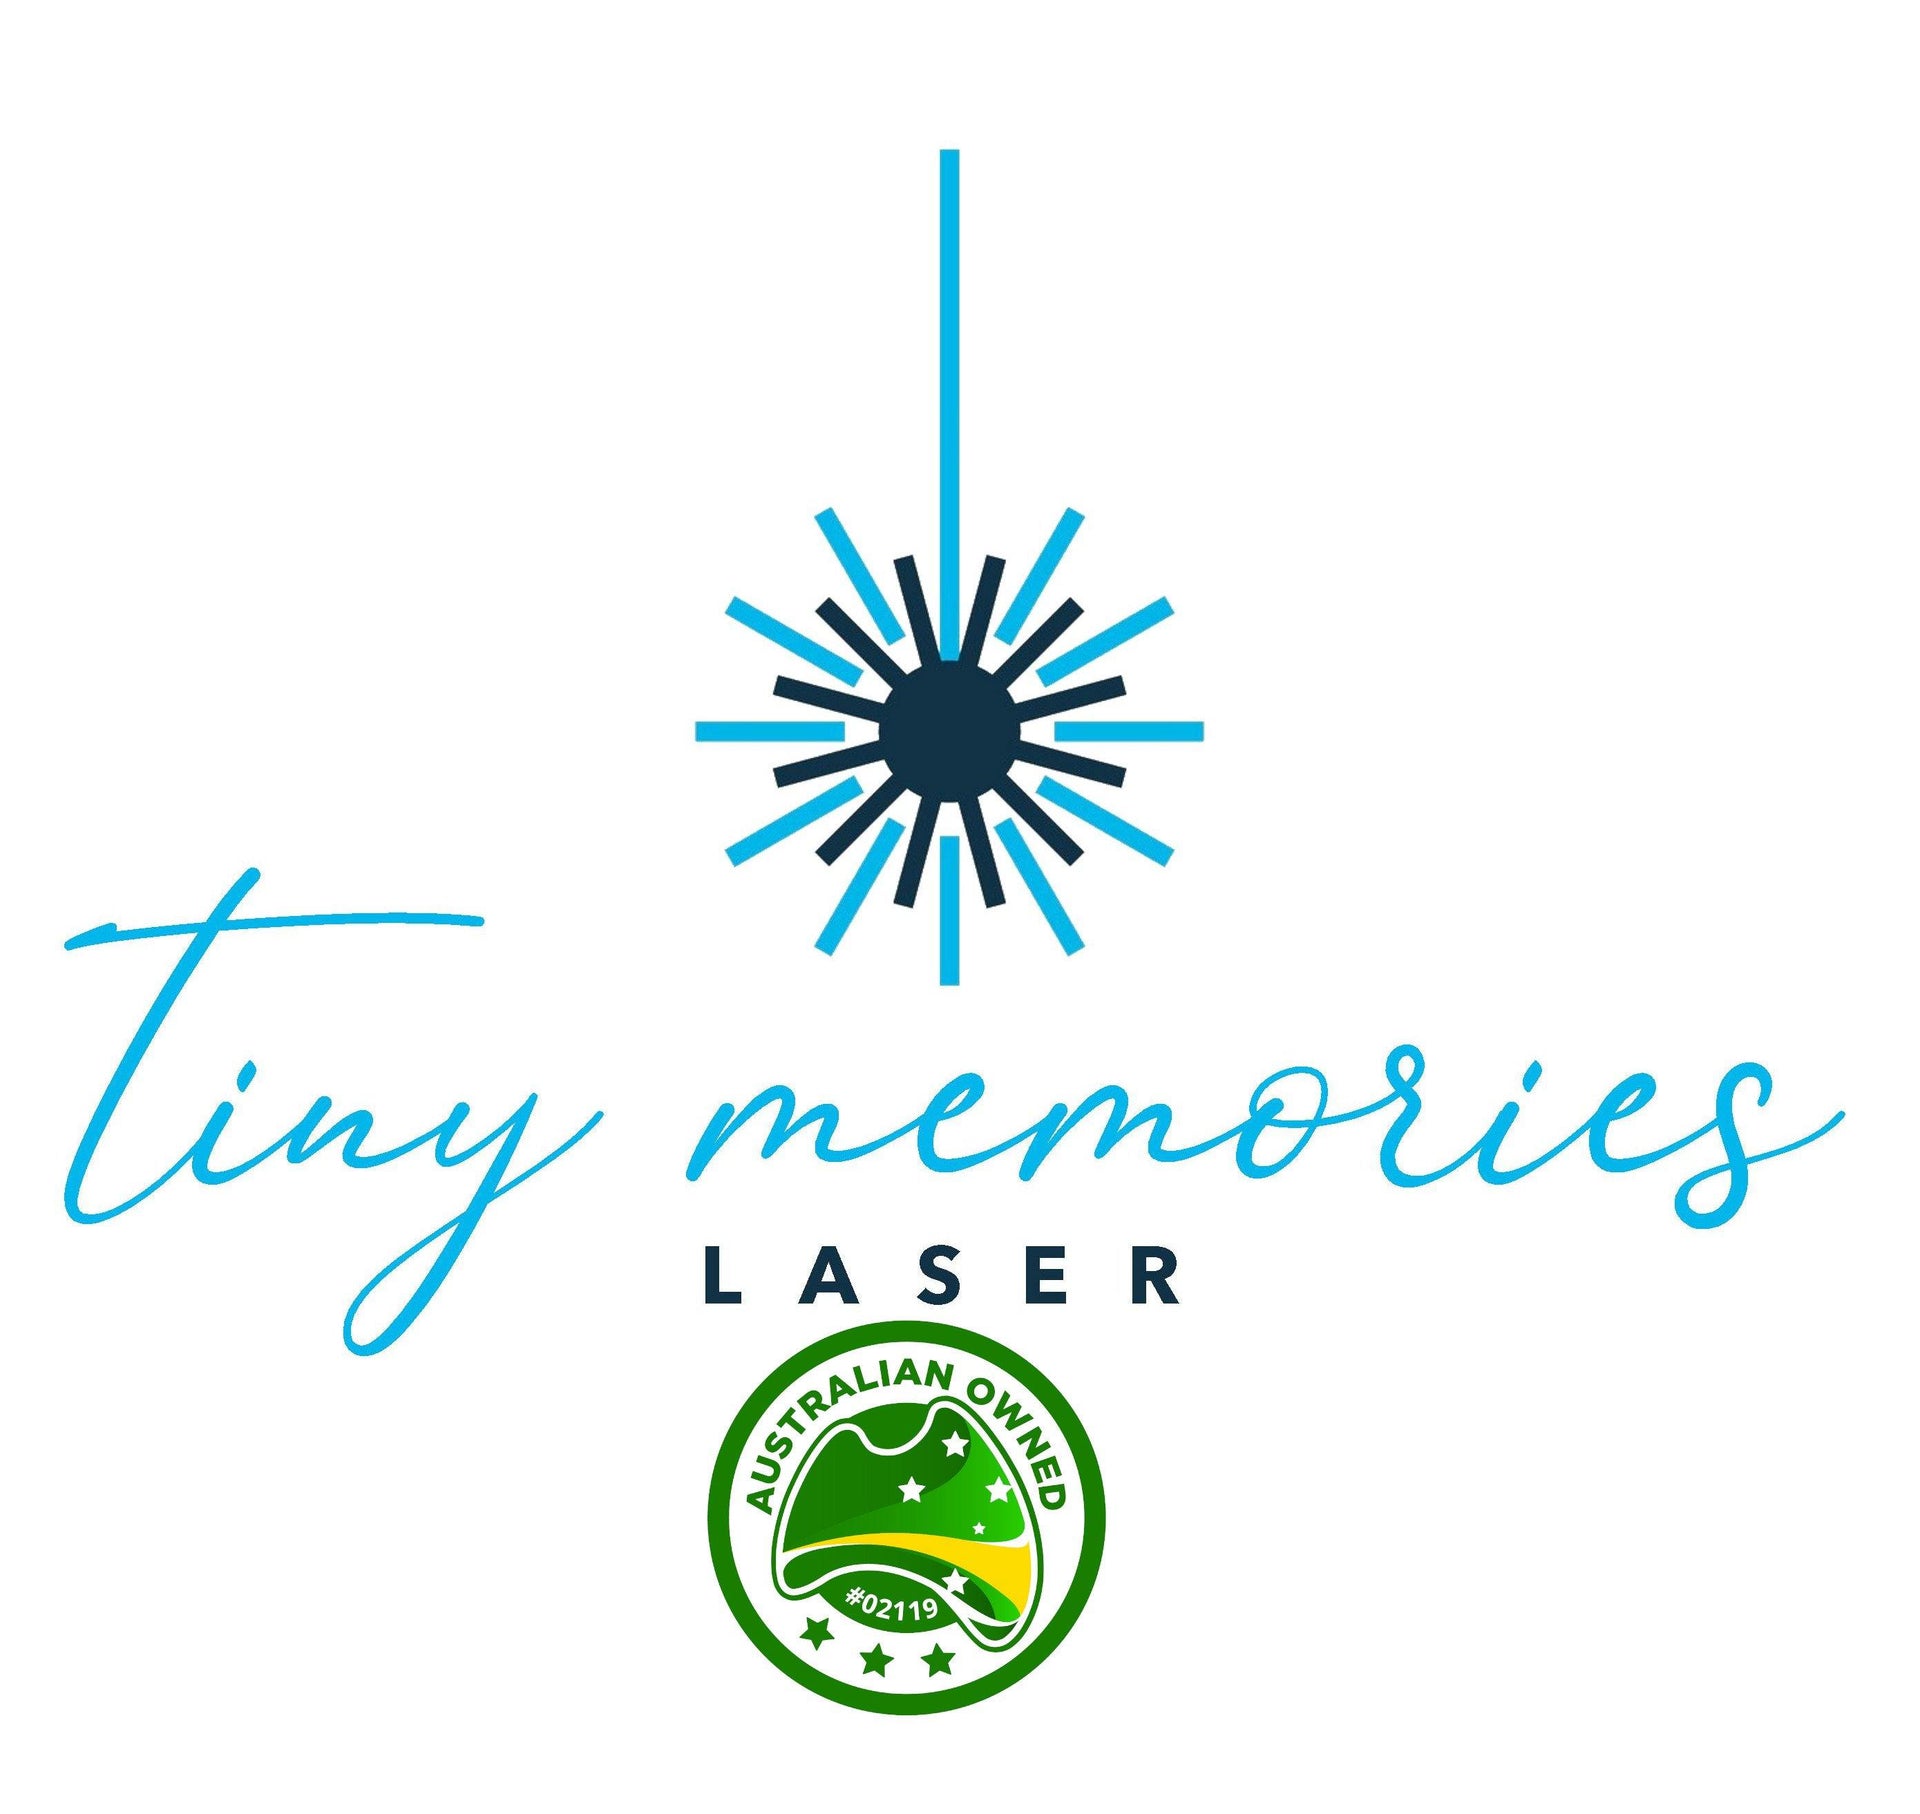 We have reached 2000 orders - Thank you and congratulations!!! - Tiny Memories Laser